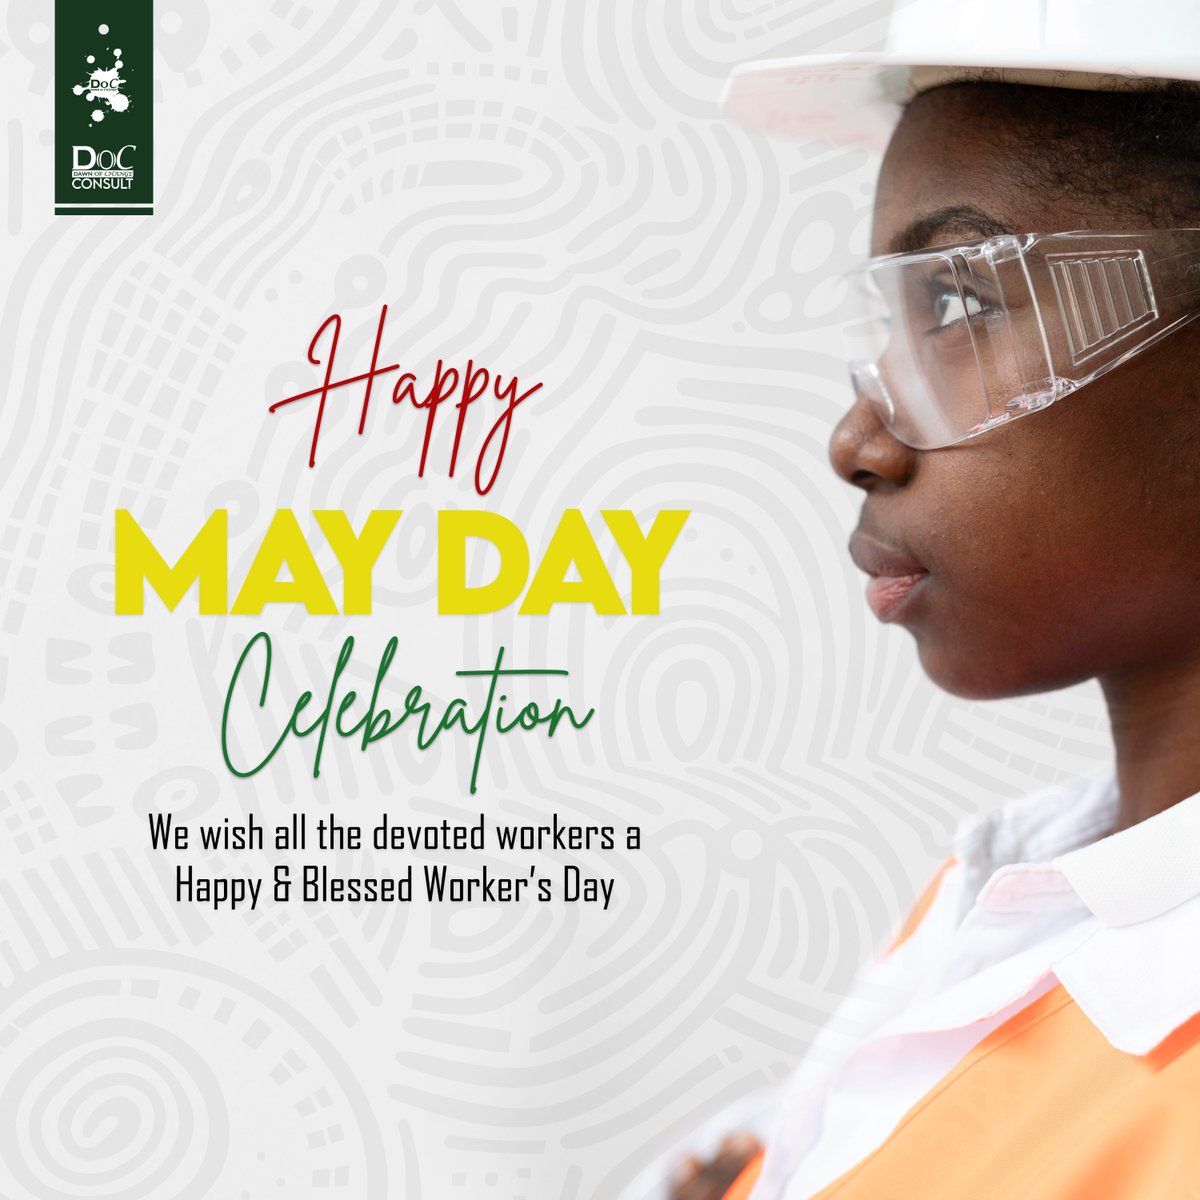 Happy Worker's Day Celebration👷👮🕵️👩‍✈️👩‍🔬👩‍🔧👩‍🚒👩‍🏫
😇😊🙏🏿🙌🏾
#dawnofchange #outreachthrugraphics #docconsults #spreadingtheword #stayblessed